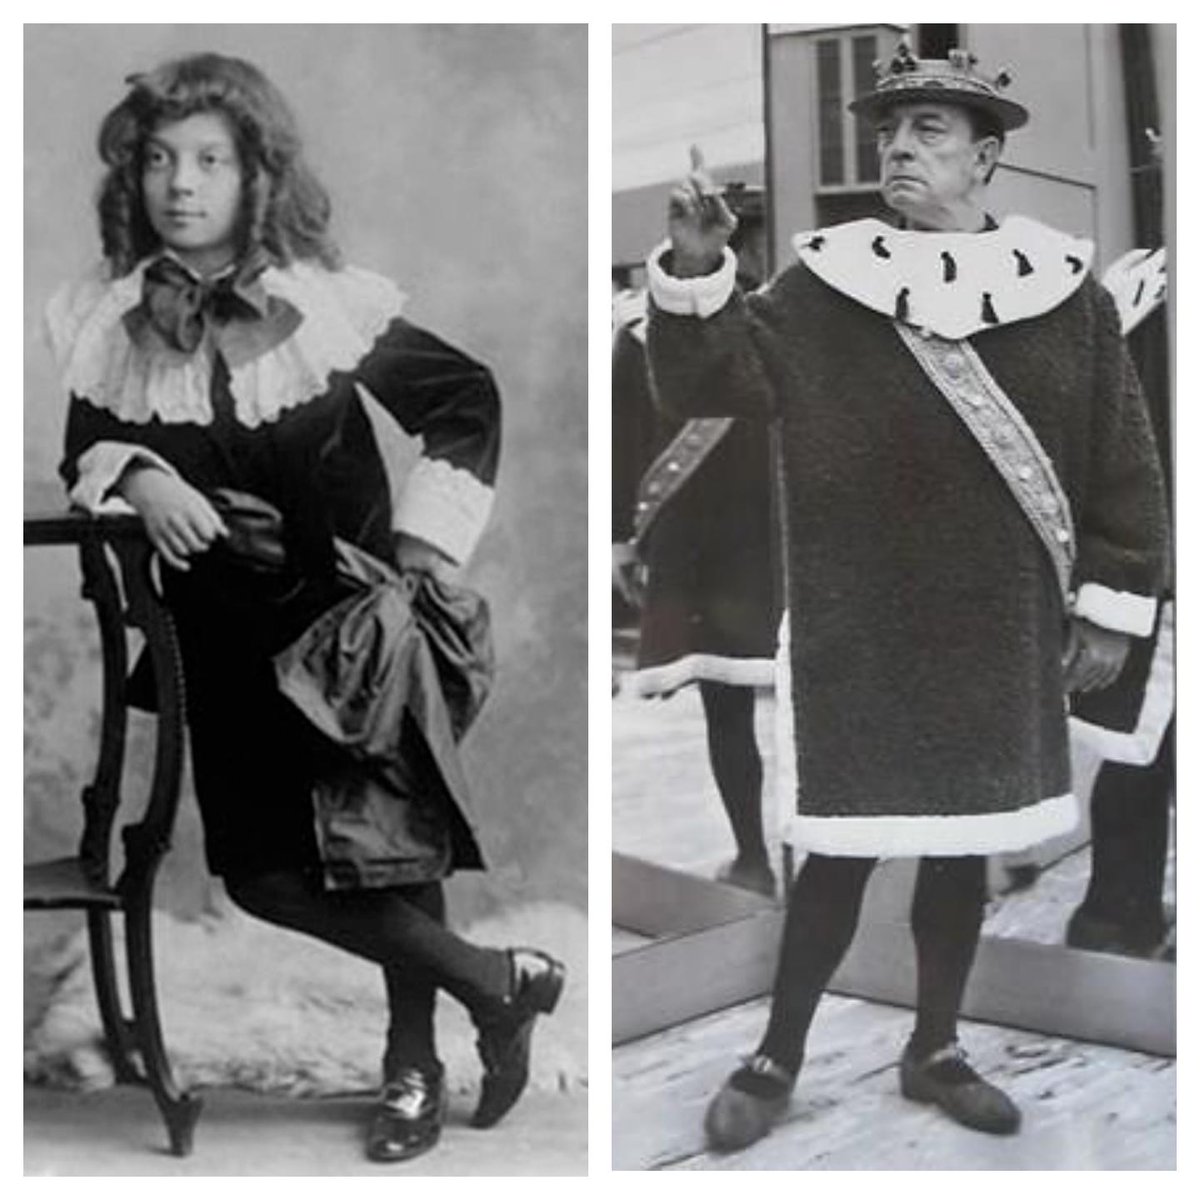 From Little Lord Fauntleroy to King Sextimus the Silent. 
#BusterKeaton
#OnceUponAMattress
#stage #vaudeville #actor #legend
#BusterLove🍀